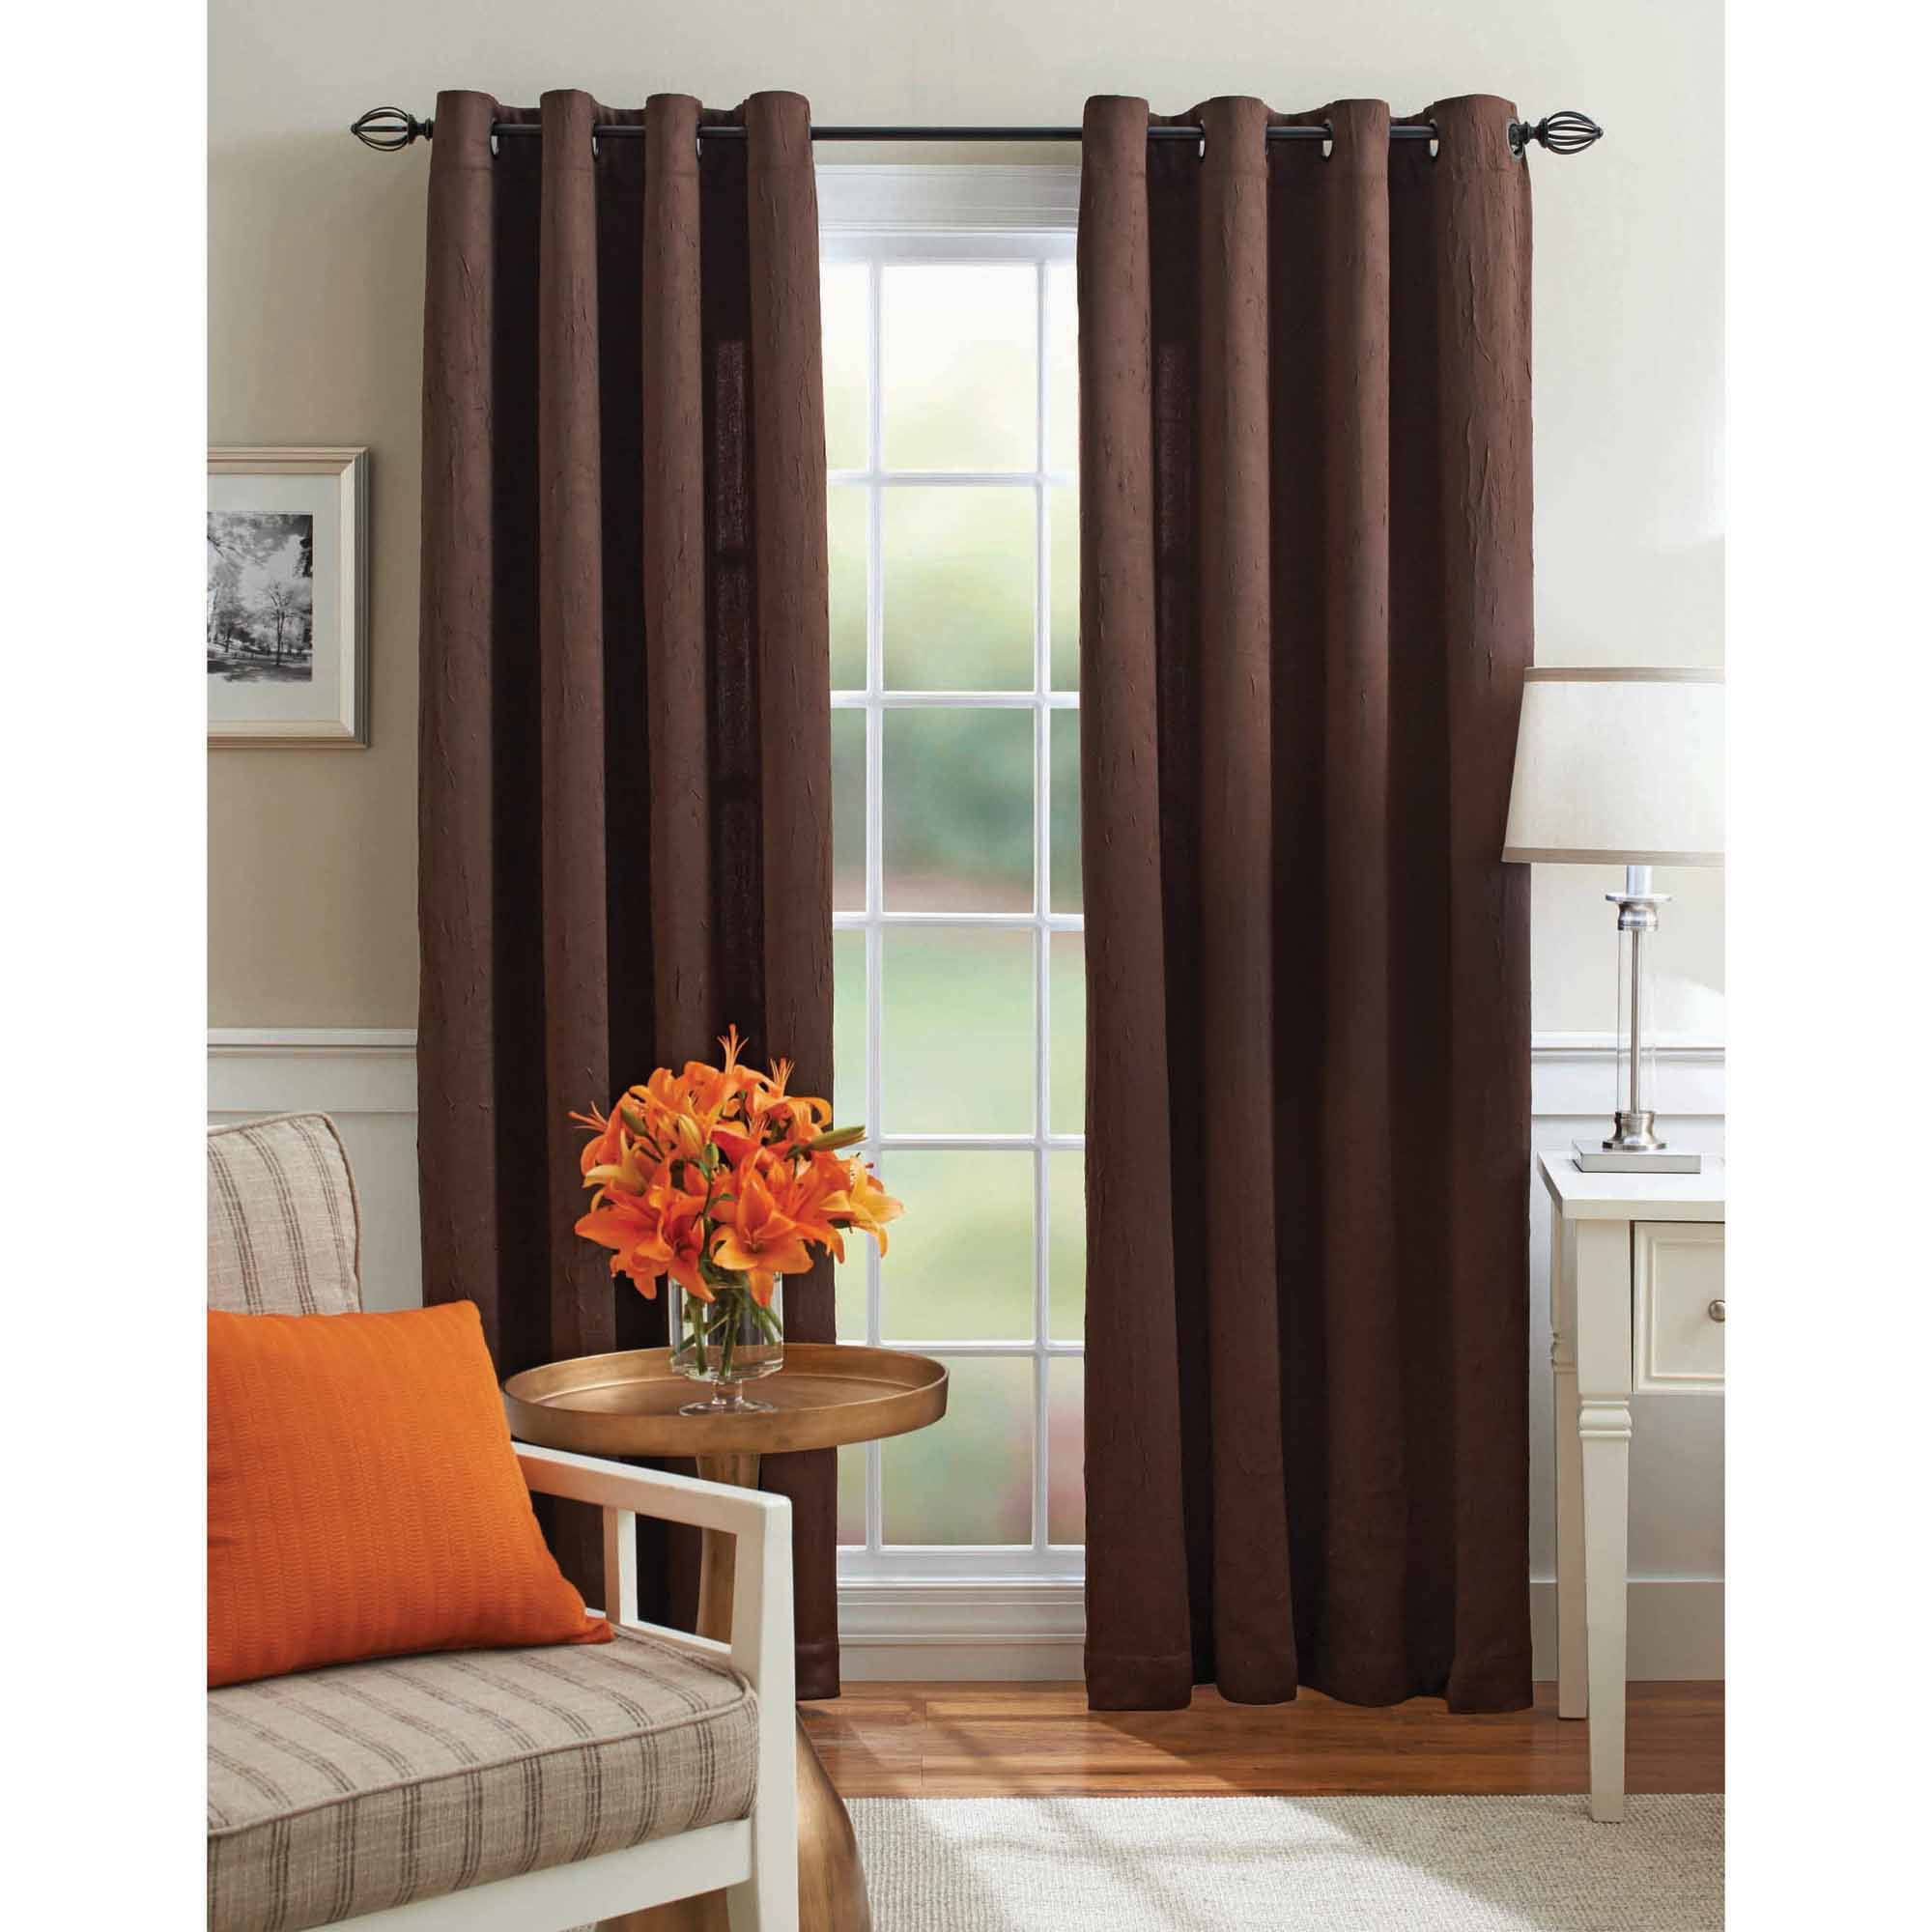 Walmart Living Room Curtains
 Curtain Add Fresh Style And Color To Your Home With